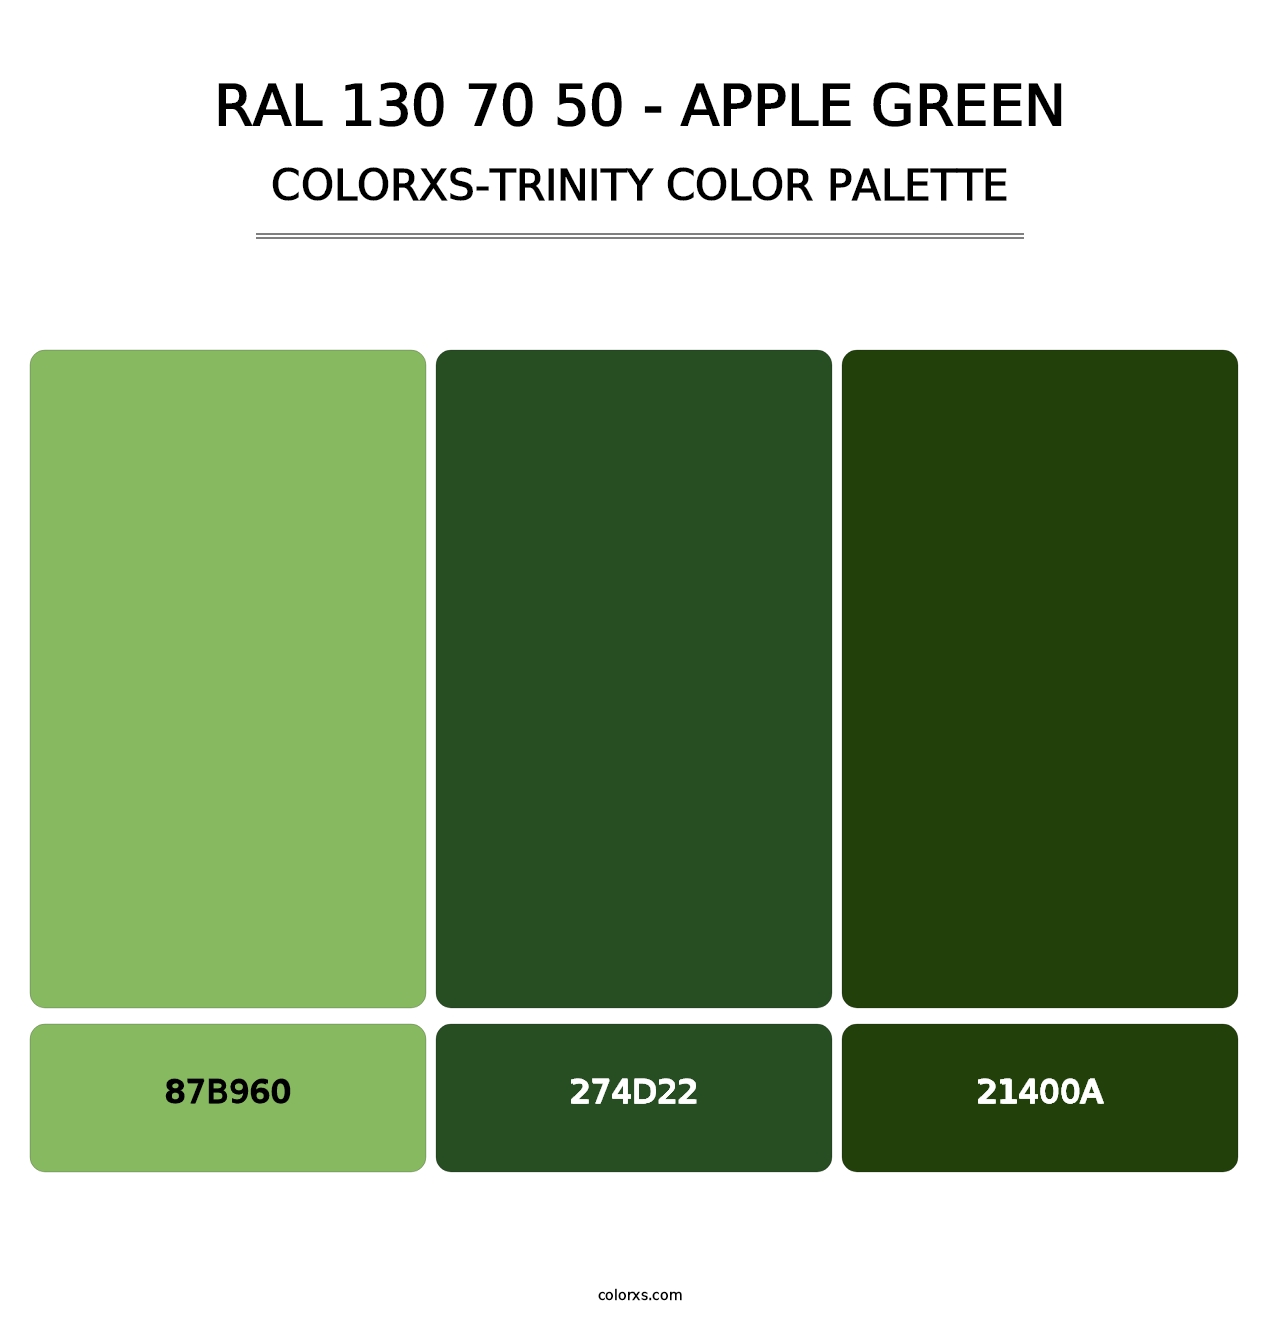 RAL 130 70 50 - Apple Green - Colorxs Trinity Palette